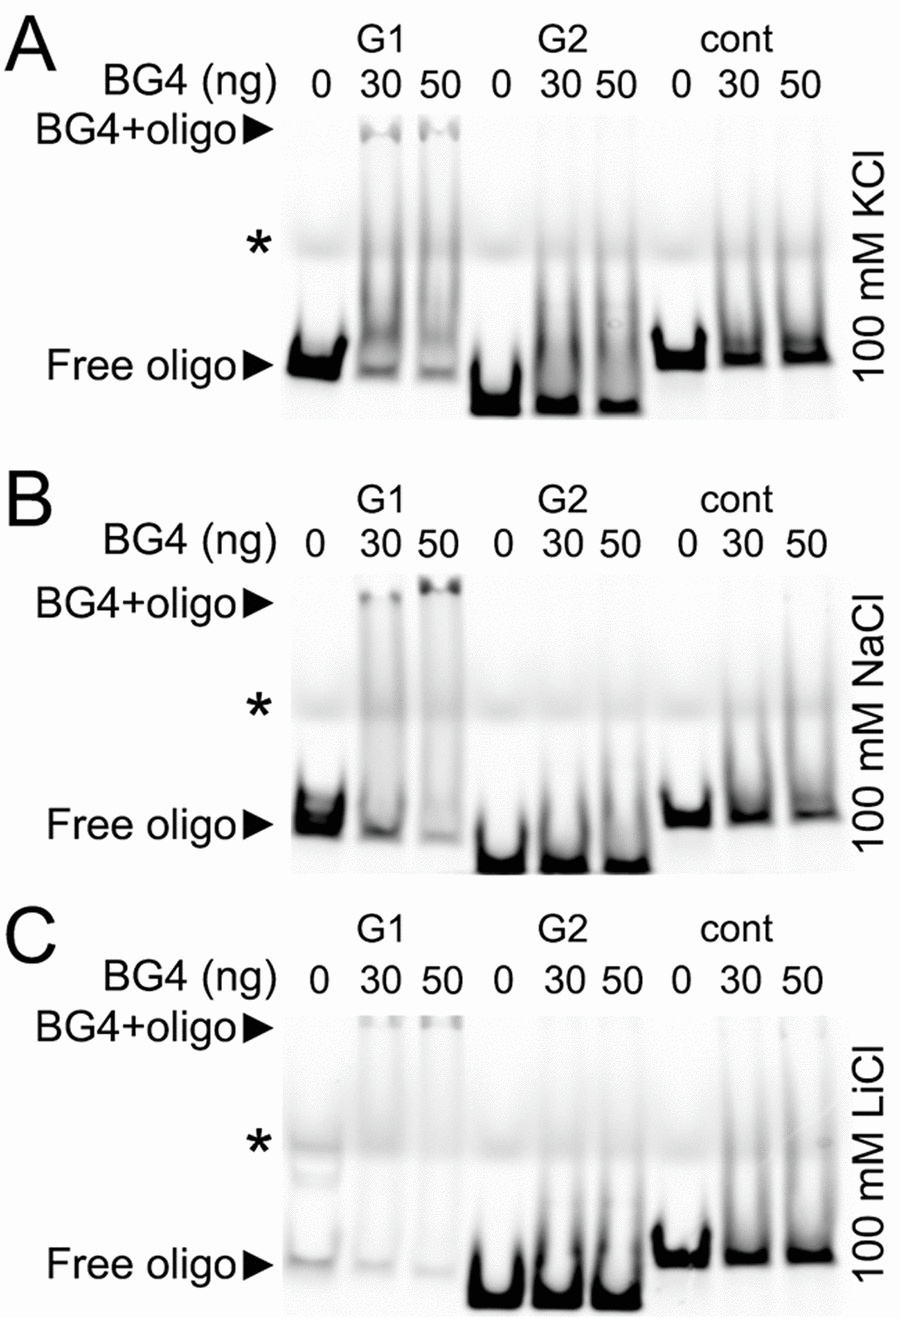 The G-quadruplex-specific antibody BG4 binds to a G-rich oligonucleotide derived from the promoter of Brca1. (А) The Cy5-conjugated BRCA1-G1 (G1), BRCA1-G2 (G2), and BRCA1-cont (cont) oligonucleotides (see Methods) were heat-denatured and then slow-cooled in the presence of K+ (KCl) to allow the formation of a secondary structure. 1.5 pmoles of each oligonucleotides (oligo) and 0 (a buffer alone), 30 or 50 ng of the BG4 antibody were incubated in a buffer, which contained 100 mM KCl. Note the bands that correspond to the free BRCA1-G1 (at the bottom) and the BRCA1-G1 bound to the BG4 antibody (at the gel top), both indicated with arrow heads. An asterisk marks the faint bands, which resulted from a loading dye. (B) The Cy5-conjugated BRCA1-G1 (G1), BRCA1-G2 (G2), and BRCA1-cont (cont) oligonucleotides were prepared in the presence of Na+ (NaCl). 1.5 pmoles of each oligonucleotides (oligo) and 0 (a buffer alone), 30 or 50 ng of the BG4 antibody were incubated in a buffer, which contained 100 mM NaCl. Note the bands that correspond to the free BRCA1-G1 (at the bottom) and the BRCA1-G1/BG4 complex (at the gel top), depictured with arrow heads. An asterisk marks the loading dye bands. (C) The Cy5-labeled BRCA1-G1 (G1), BRCA1-G2 (G2), and BRCA1-cont (cont) oligonucleotides were prepared in the presence of Li+ (LiCl). 1.5 pmoles of each oligonucleotides (oligo) and 0 (a buffer alone), 30 or 50 ng of the BG4 antibody were incubated in a buffer, which contained 100 mM LiCl. Note the bands that correspond to the free BRCA1-G1 (at the bottom) and a weak BRCA1-G1/BG4 complex (at the gel top), depictured with arrow heads. An asterisk marks the loading dye bands.